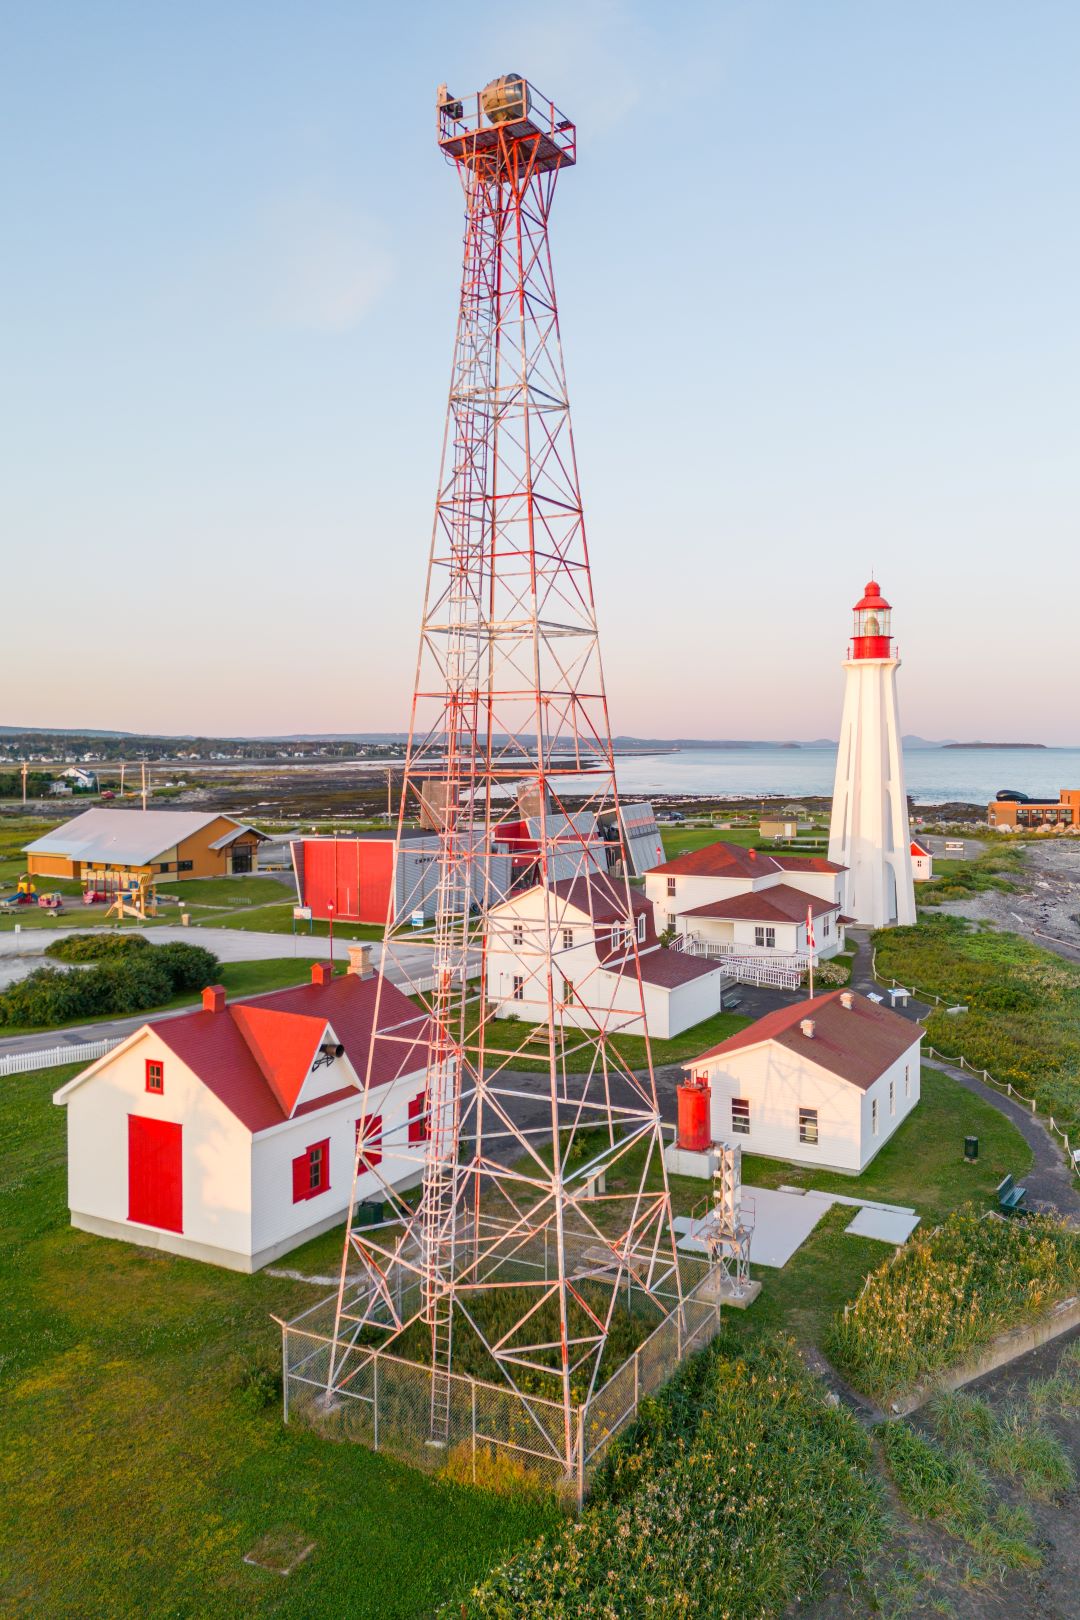 Aerial view of the lighthouse and buildings with the clerestory tower in the foreground.